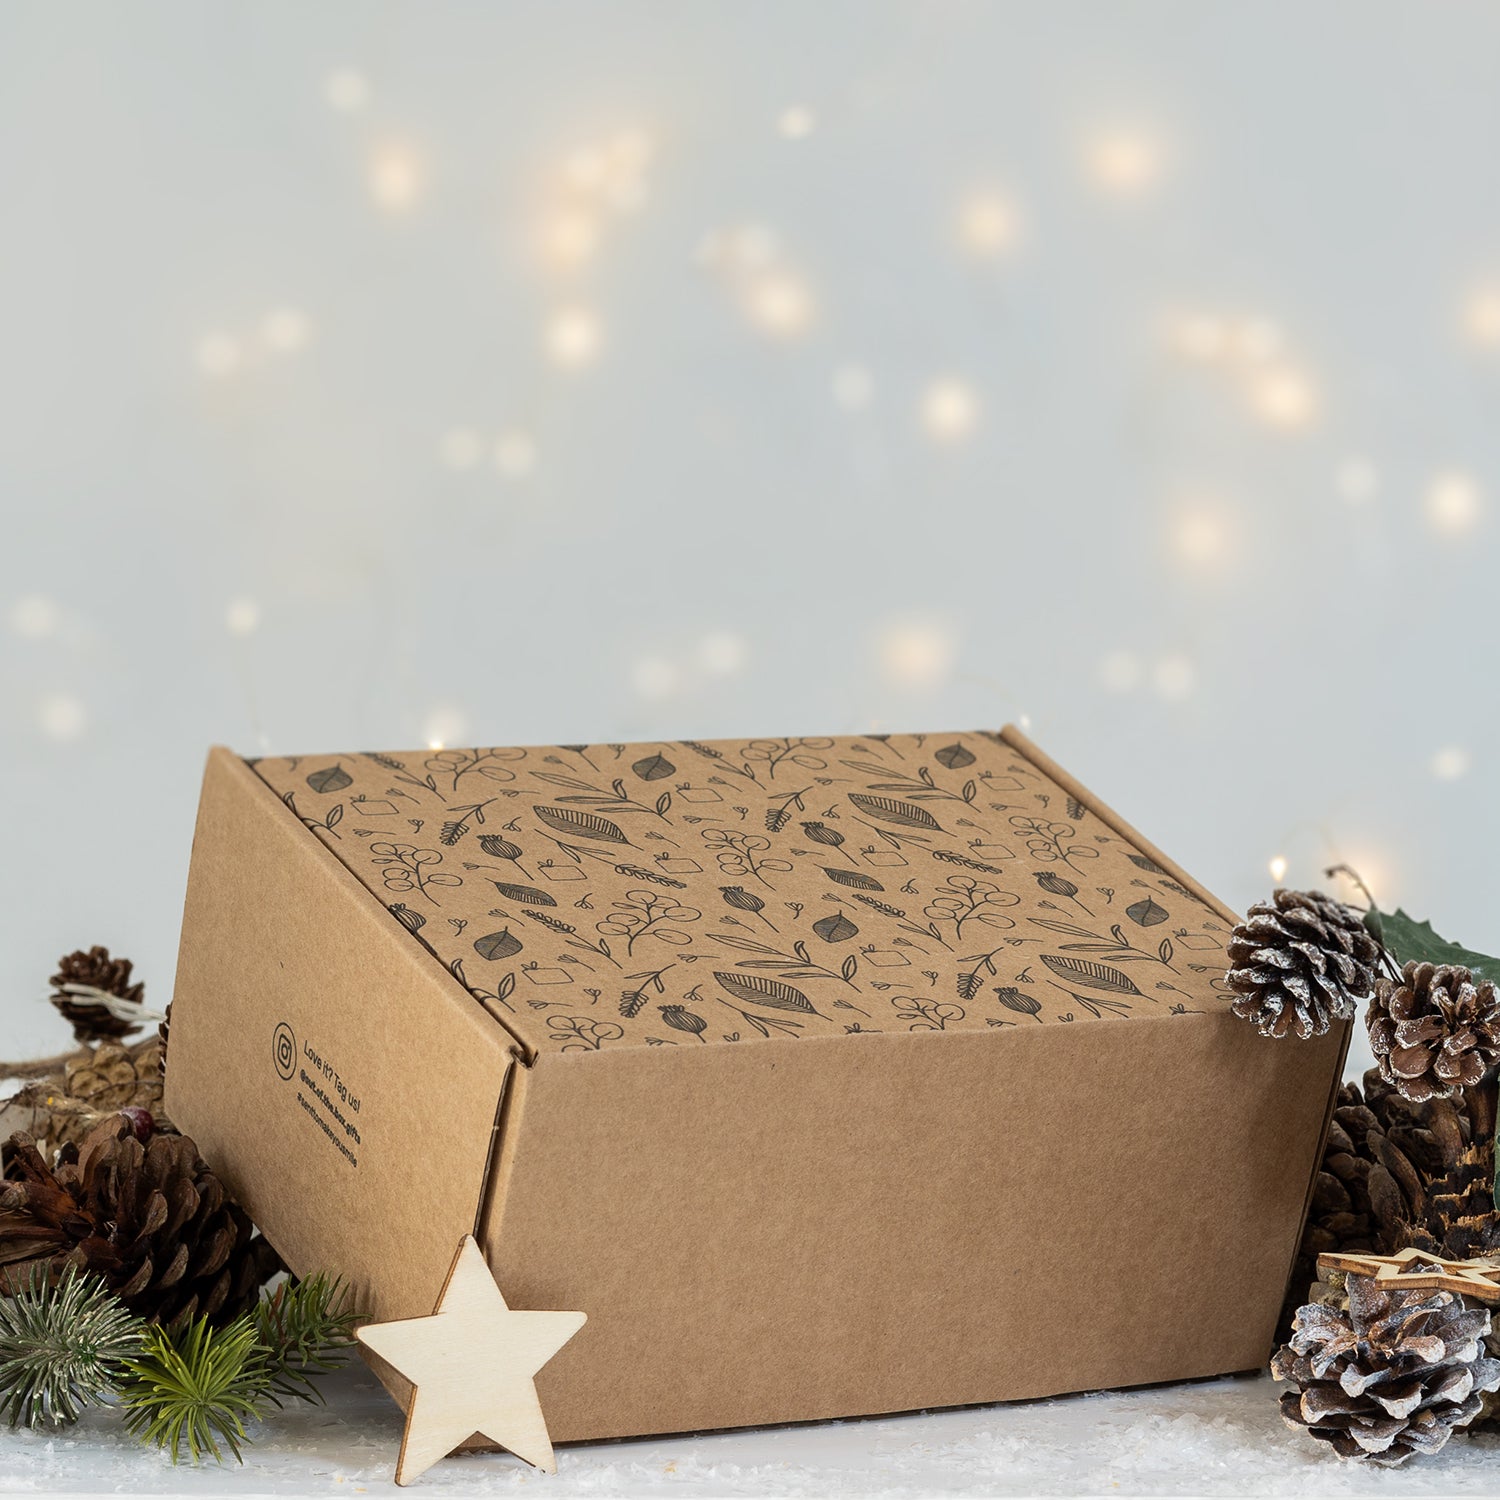 Sustainable Christmas Hampers - Christmas Gifts For Your Team and Clients from Out of the Box Gifts